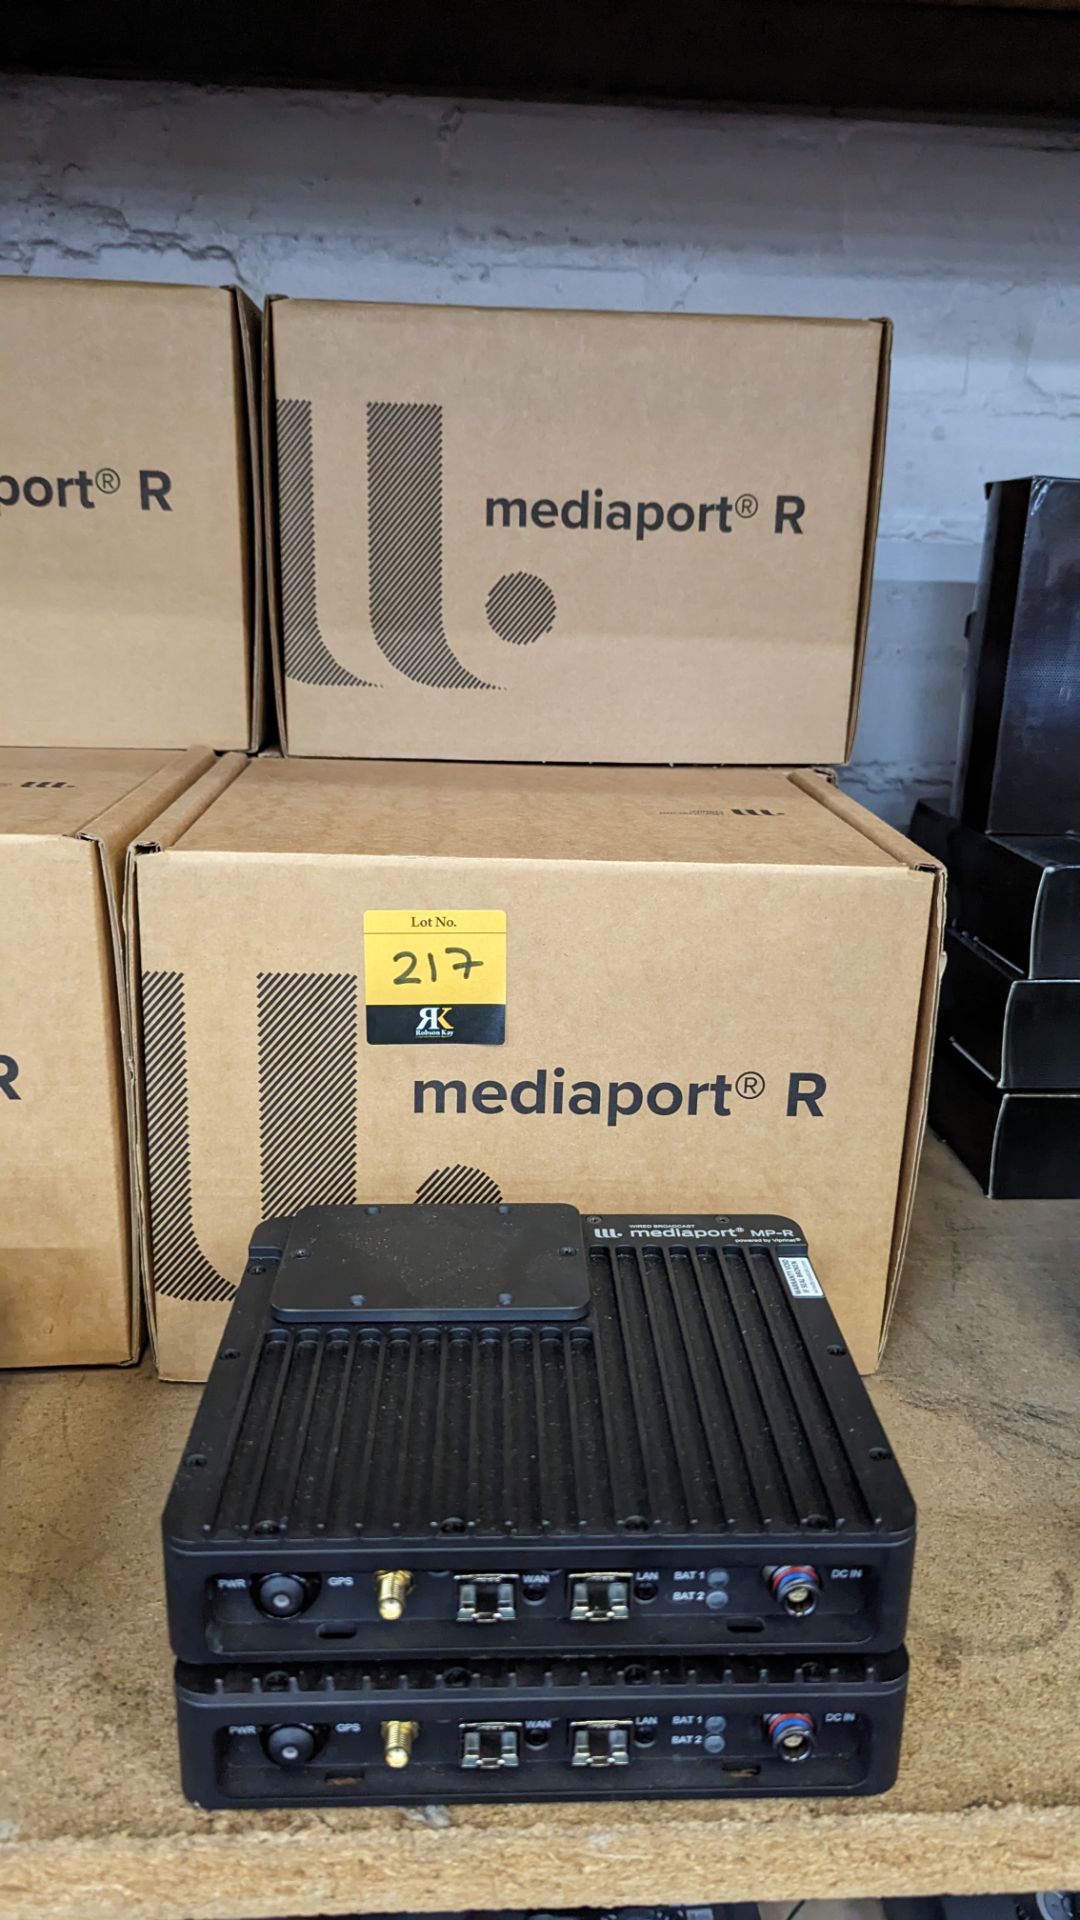 5 off Mediaport model MP-R - although some of the units are boxed there are no ancillaries/accessori